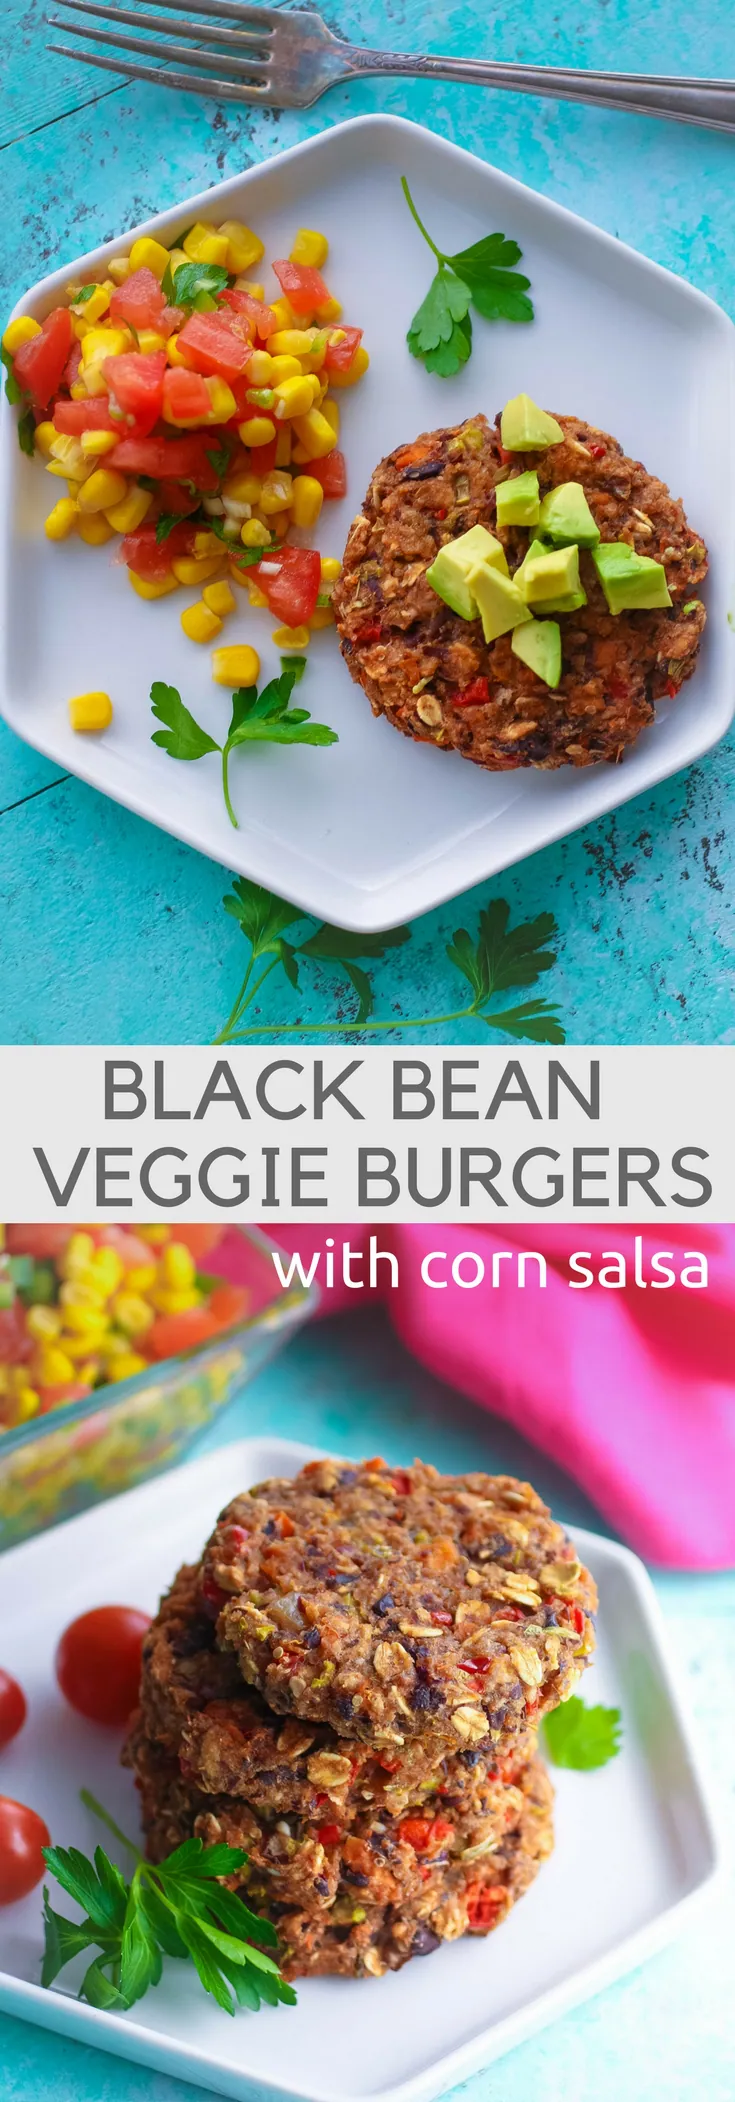 Whether you want a meatless meal or not, Black Bean Veggie Burgers with Corn Salsa are delicious! You'll enjoy Black Bean Veggie Burgers with Corn Salsa.